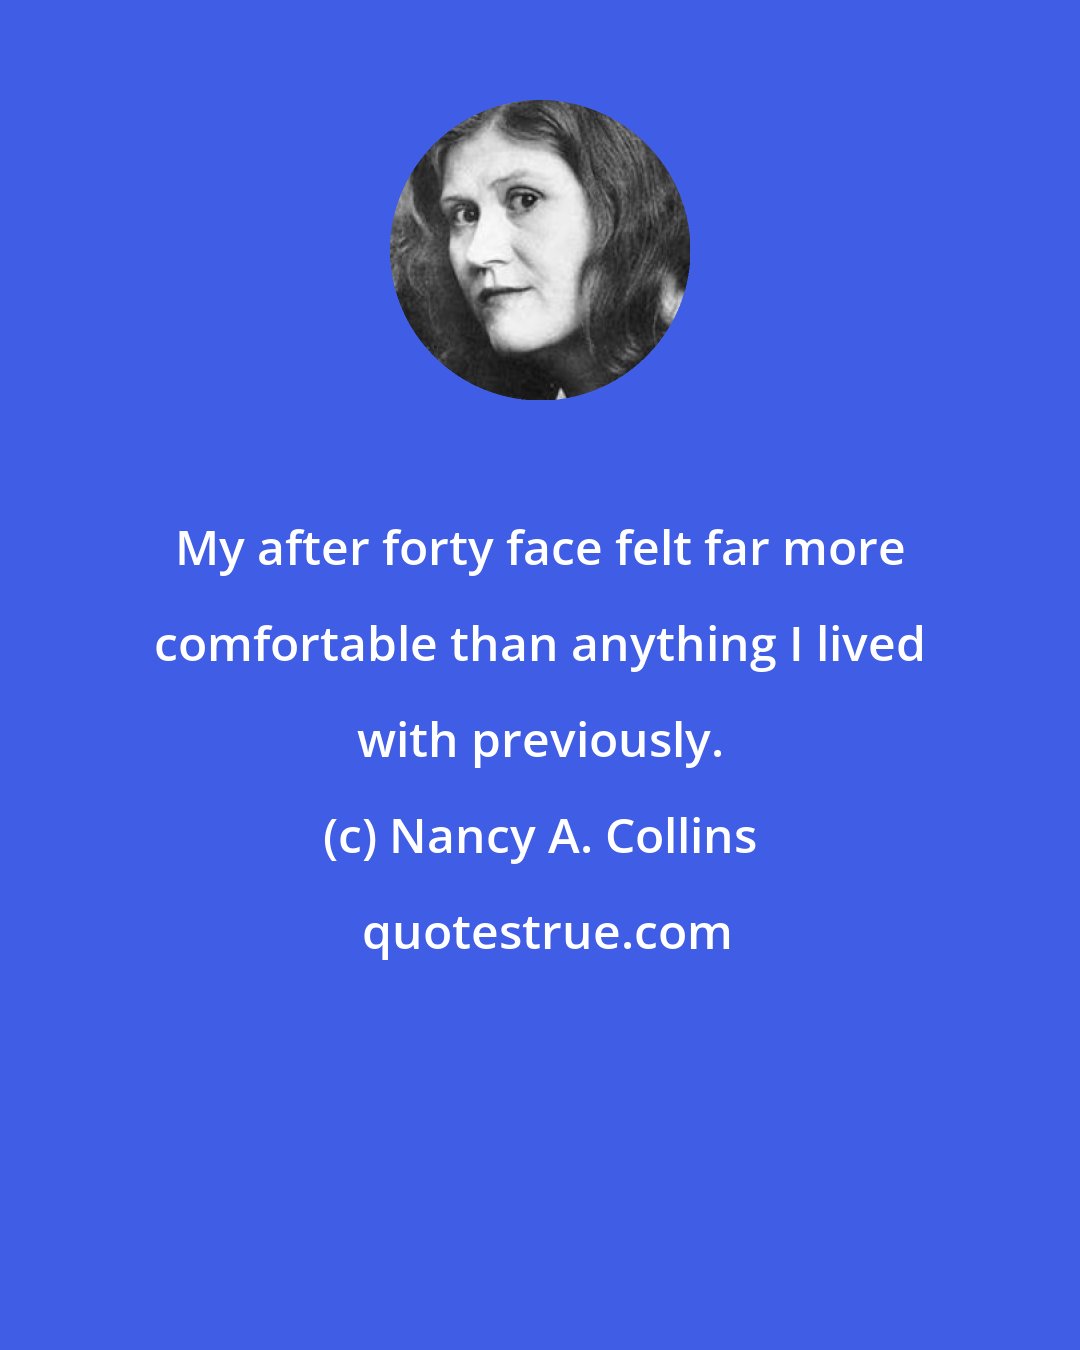 Nancy A. Collins: My after forty face felt far more comfortable than anything I lived with previously.